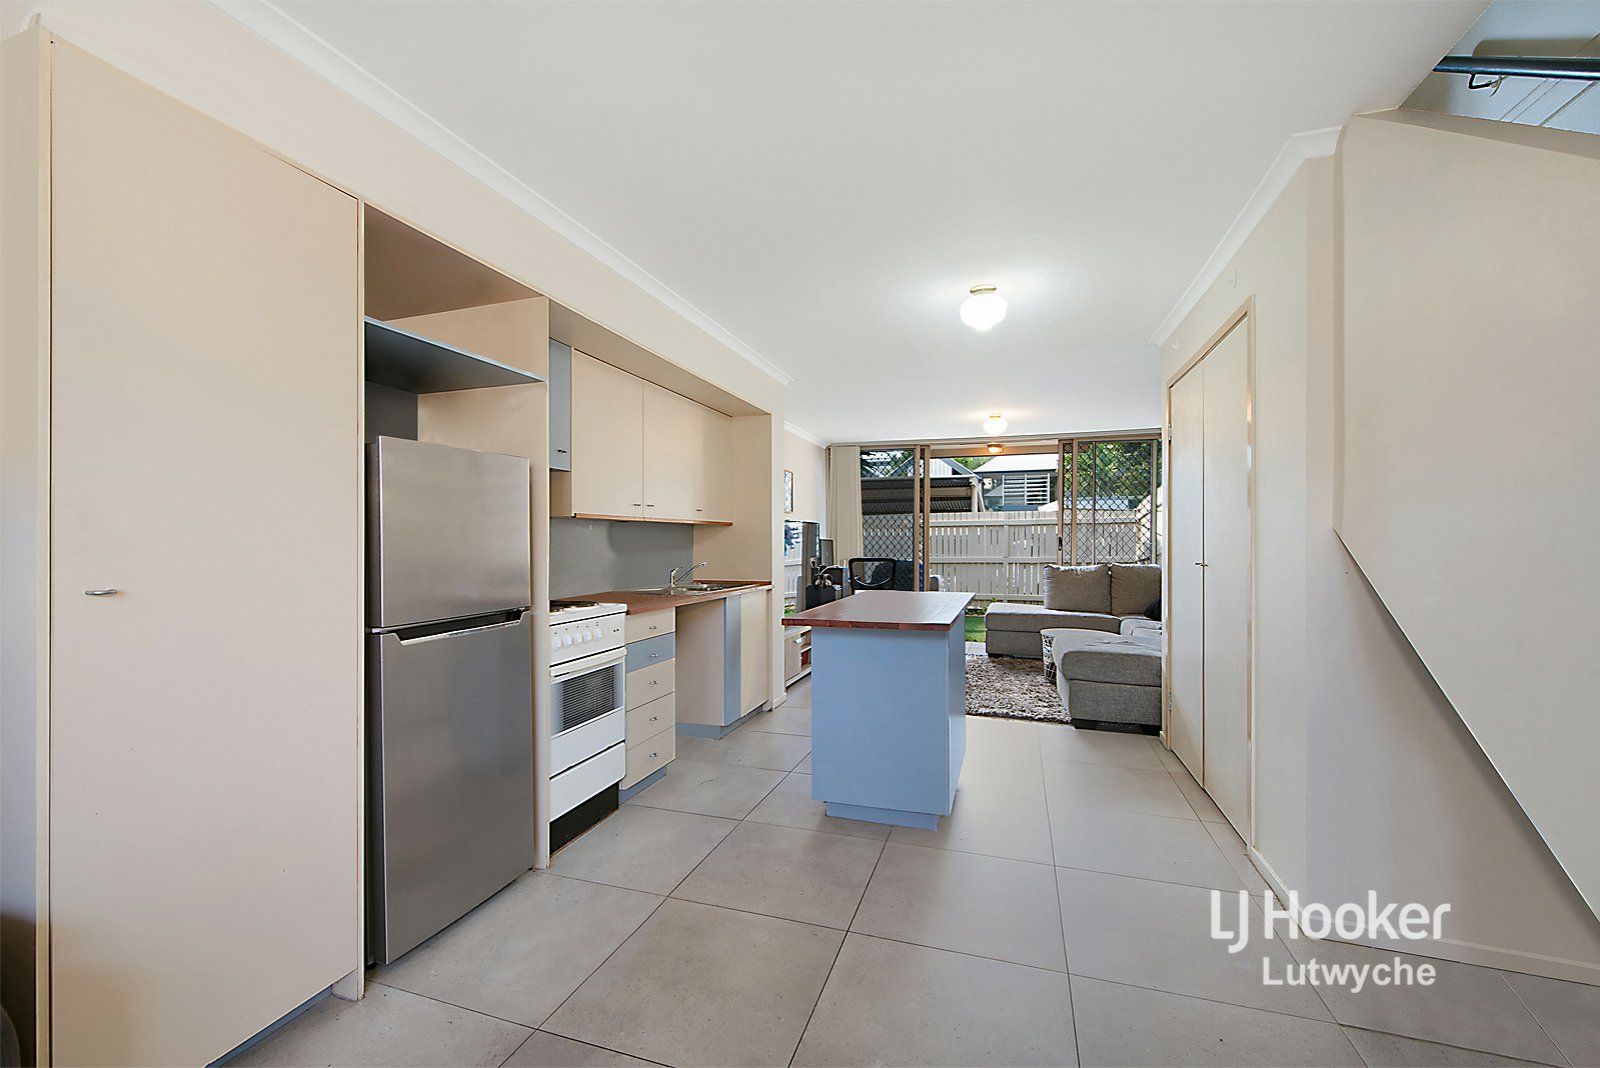 3/34 Lowerson Street, Lutwyche QLD 4030, Image 1